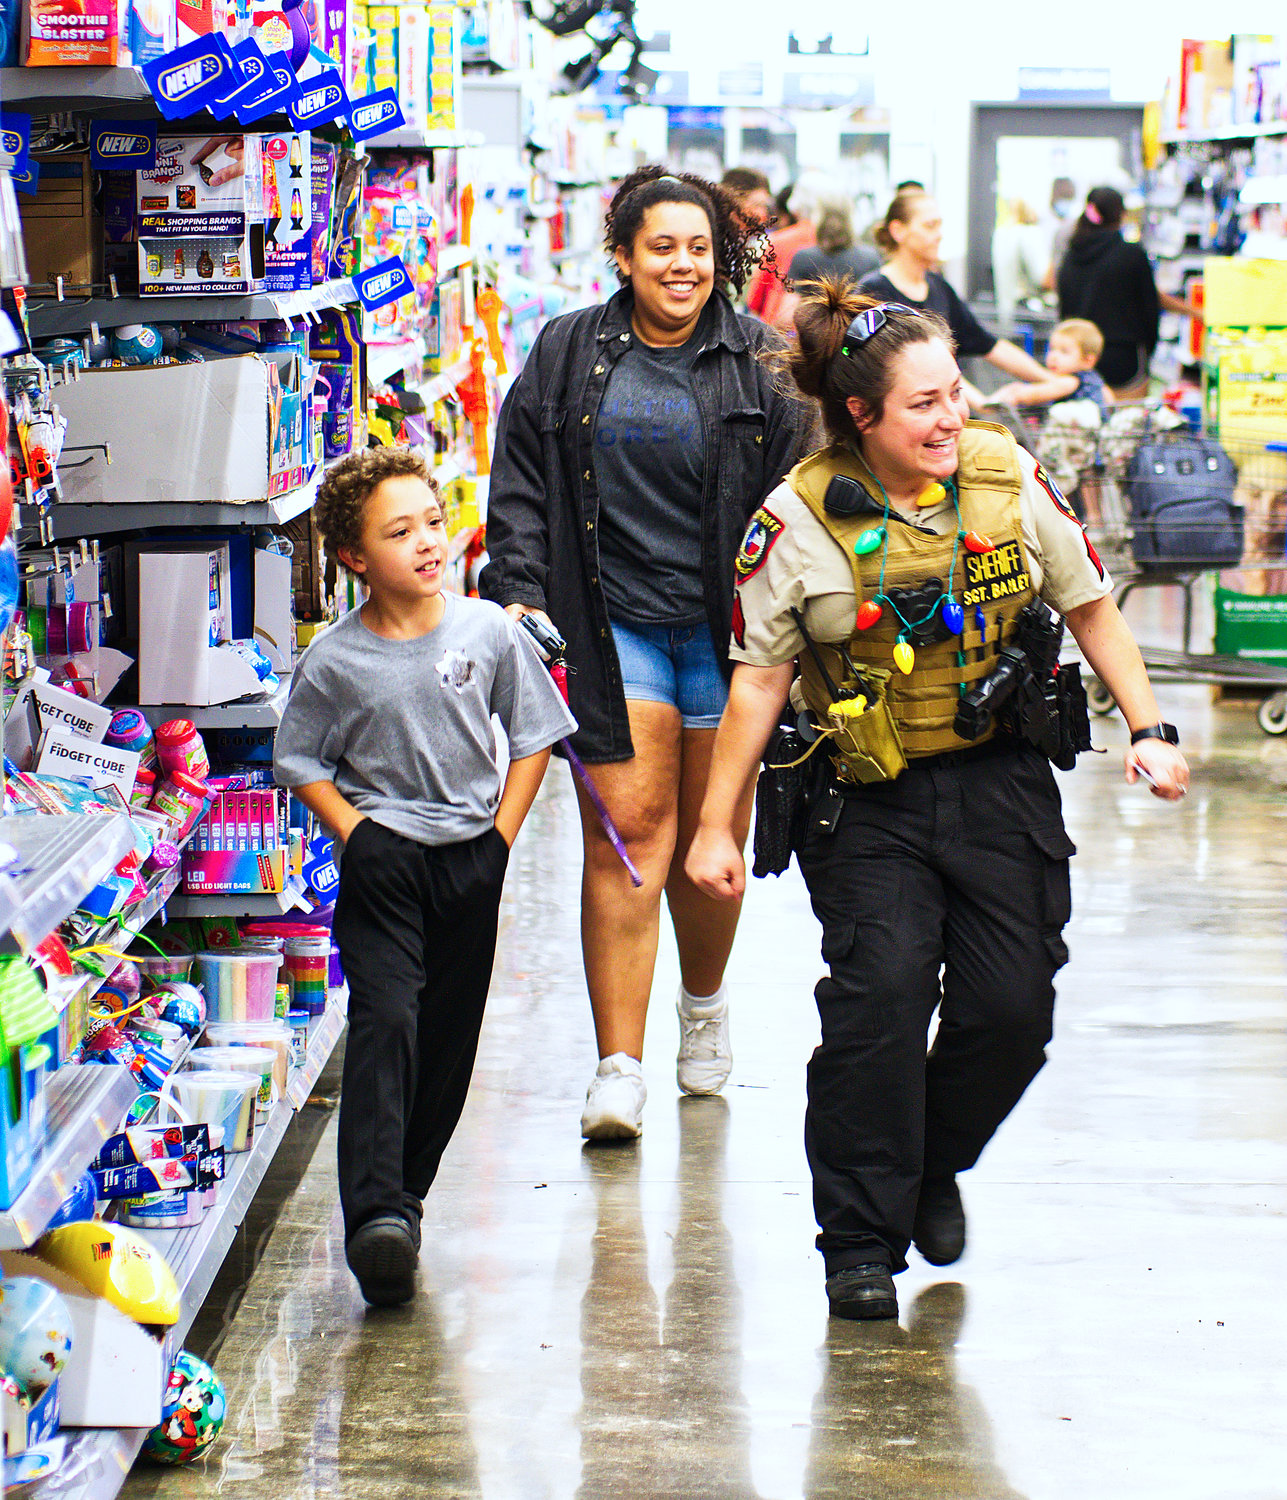 Wood County Sheriff’s Department Sgt. Heather Bailey helps Keelan Sanders locate items at Walmart during the Blue Santa shopping event last Wednesday. Local law enforcement officers assisted 50 children with more than $200 each in gifts and items they selected.